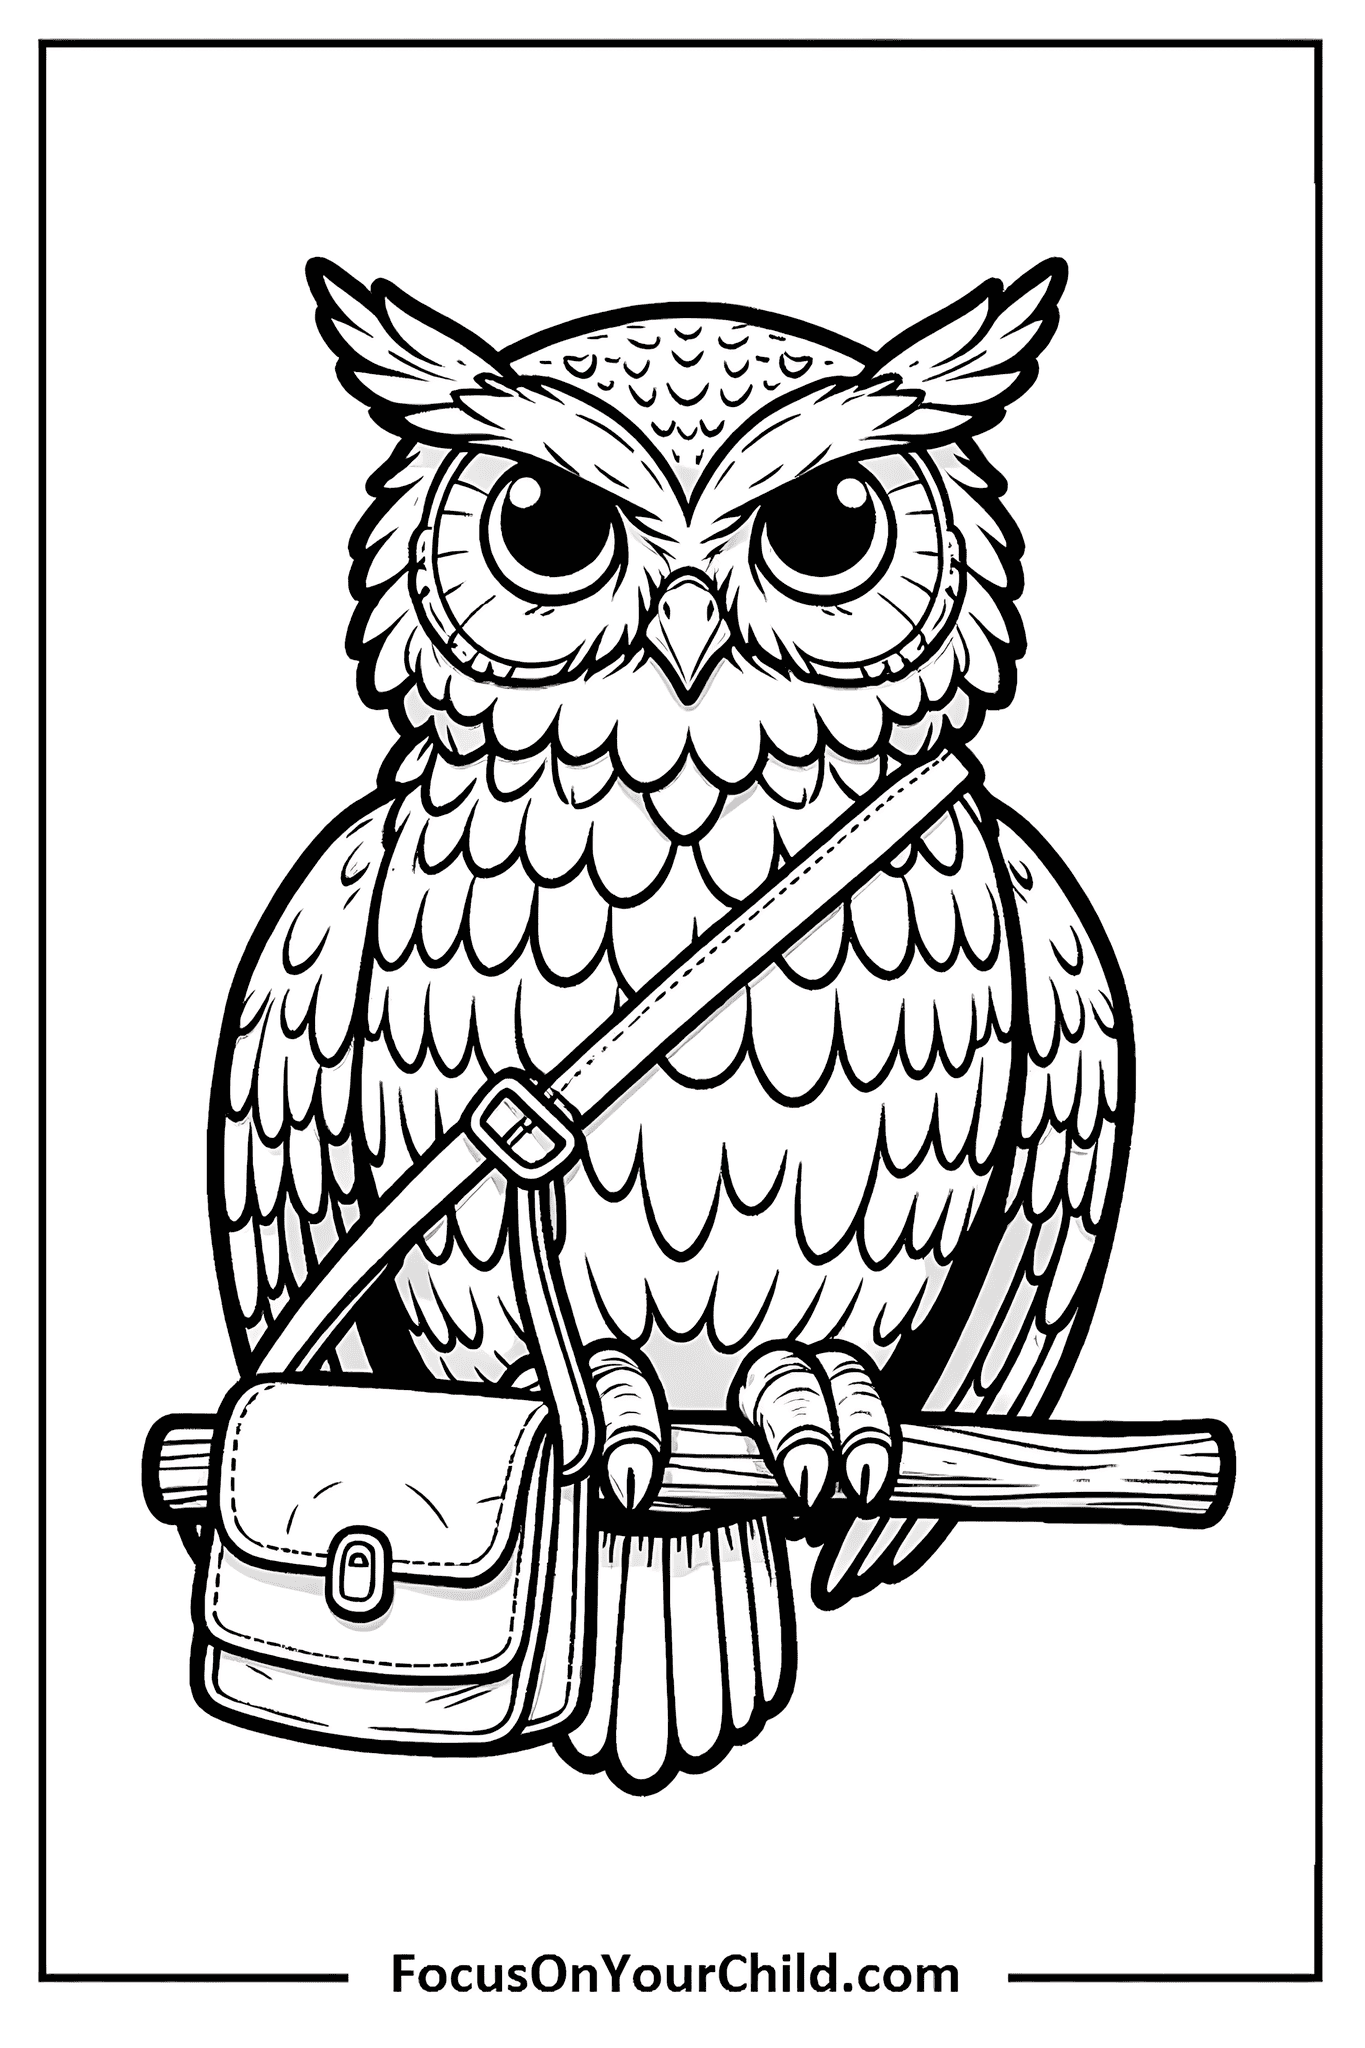 Owl line drawing with satchel, perched on branch, detailed feathers, large eyes, black-and-white.